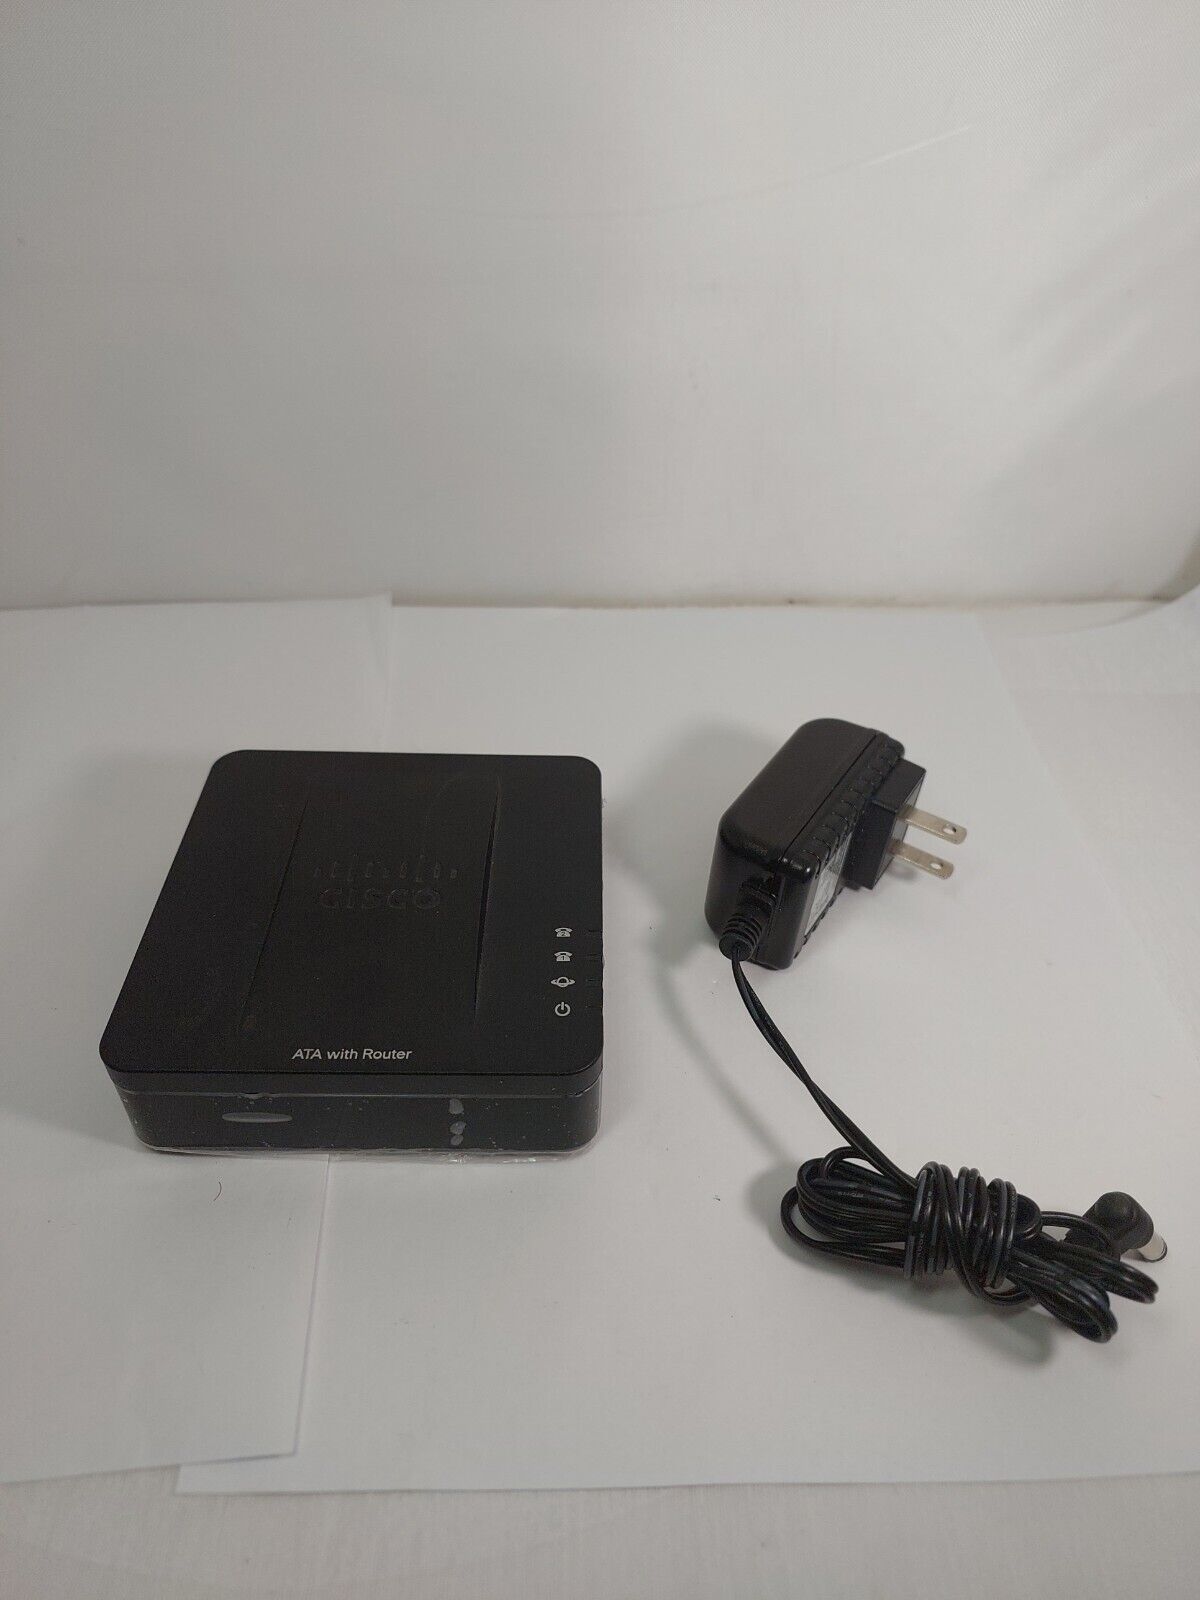 Geniune OEM Cisco SPA122 Ethernet VoIP ATA 2-Port Phone Adapter ROUTER SPA 122